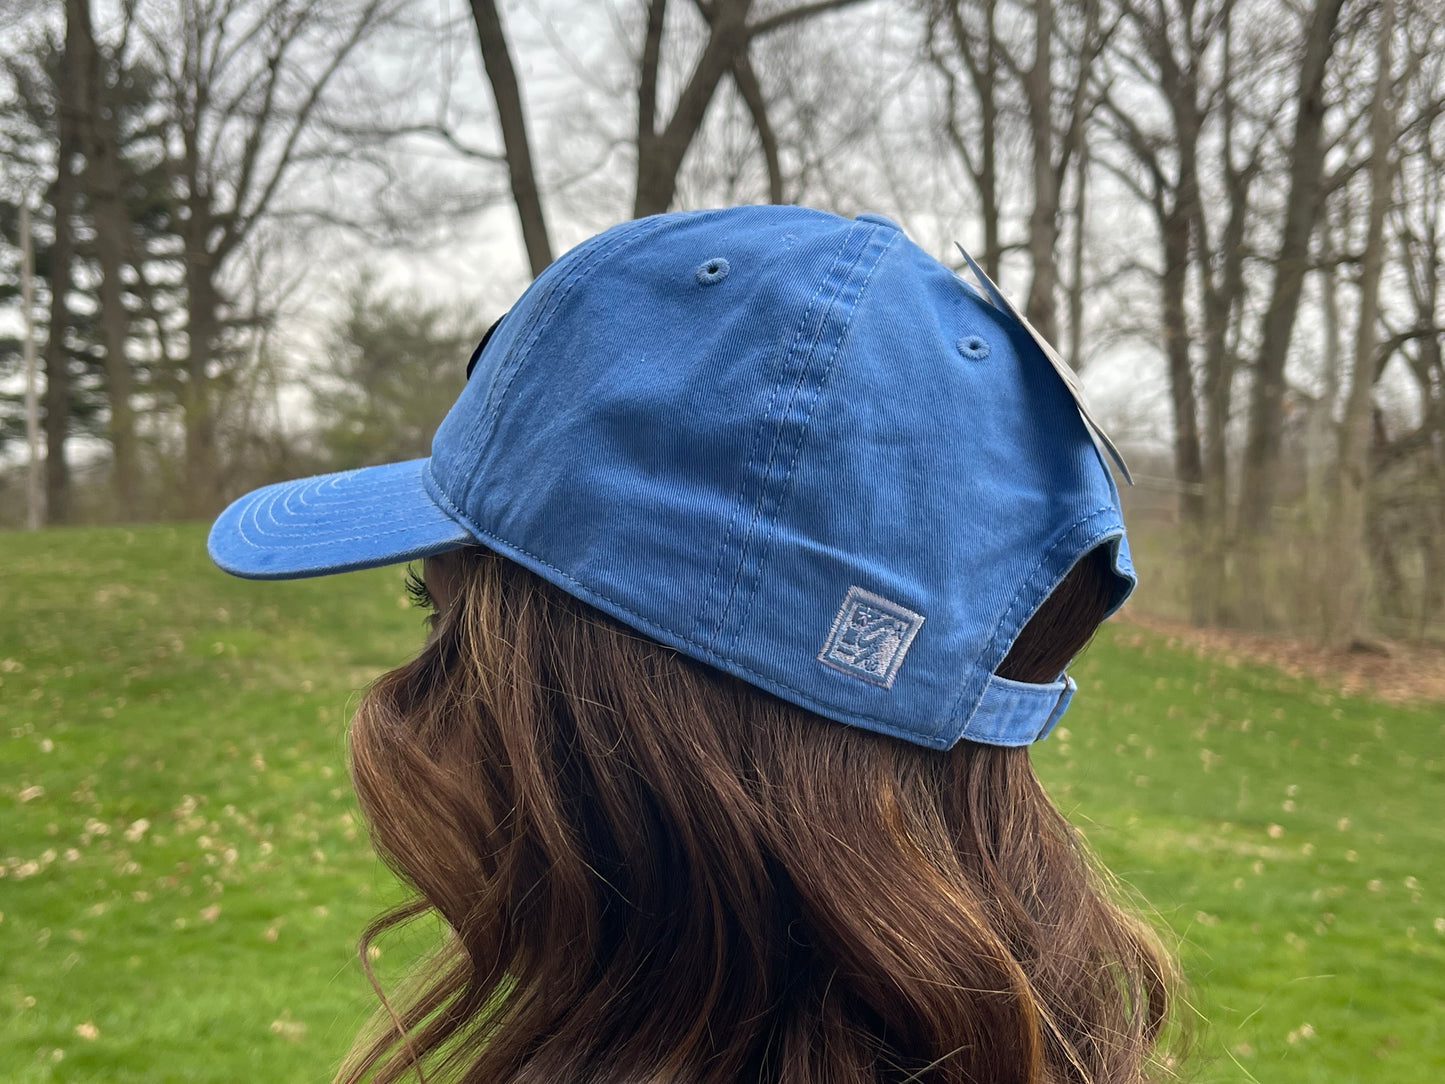 Indianapolis Motor Speedway Wing and Wheel Beach Wash Hat by Justin Patten (4 Colors)